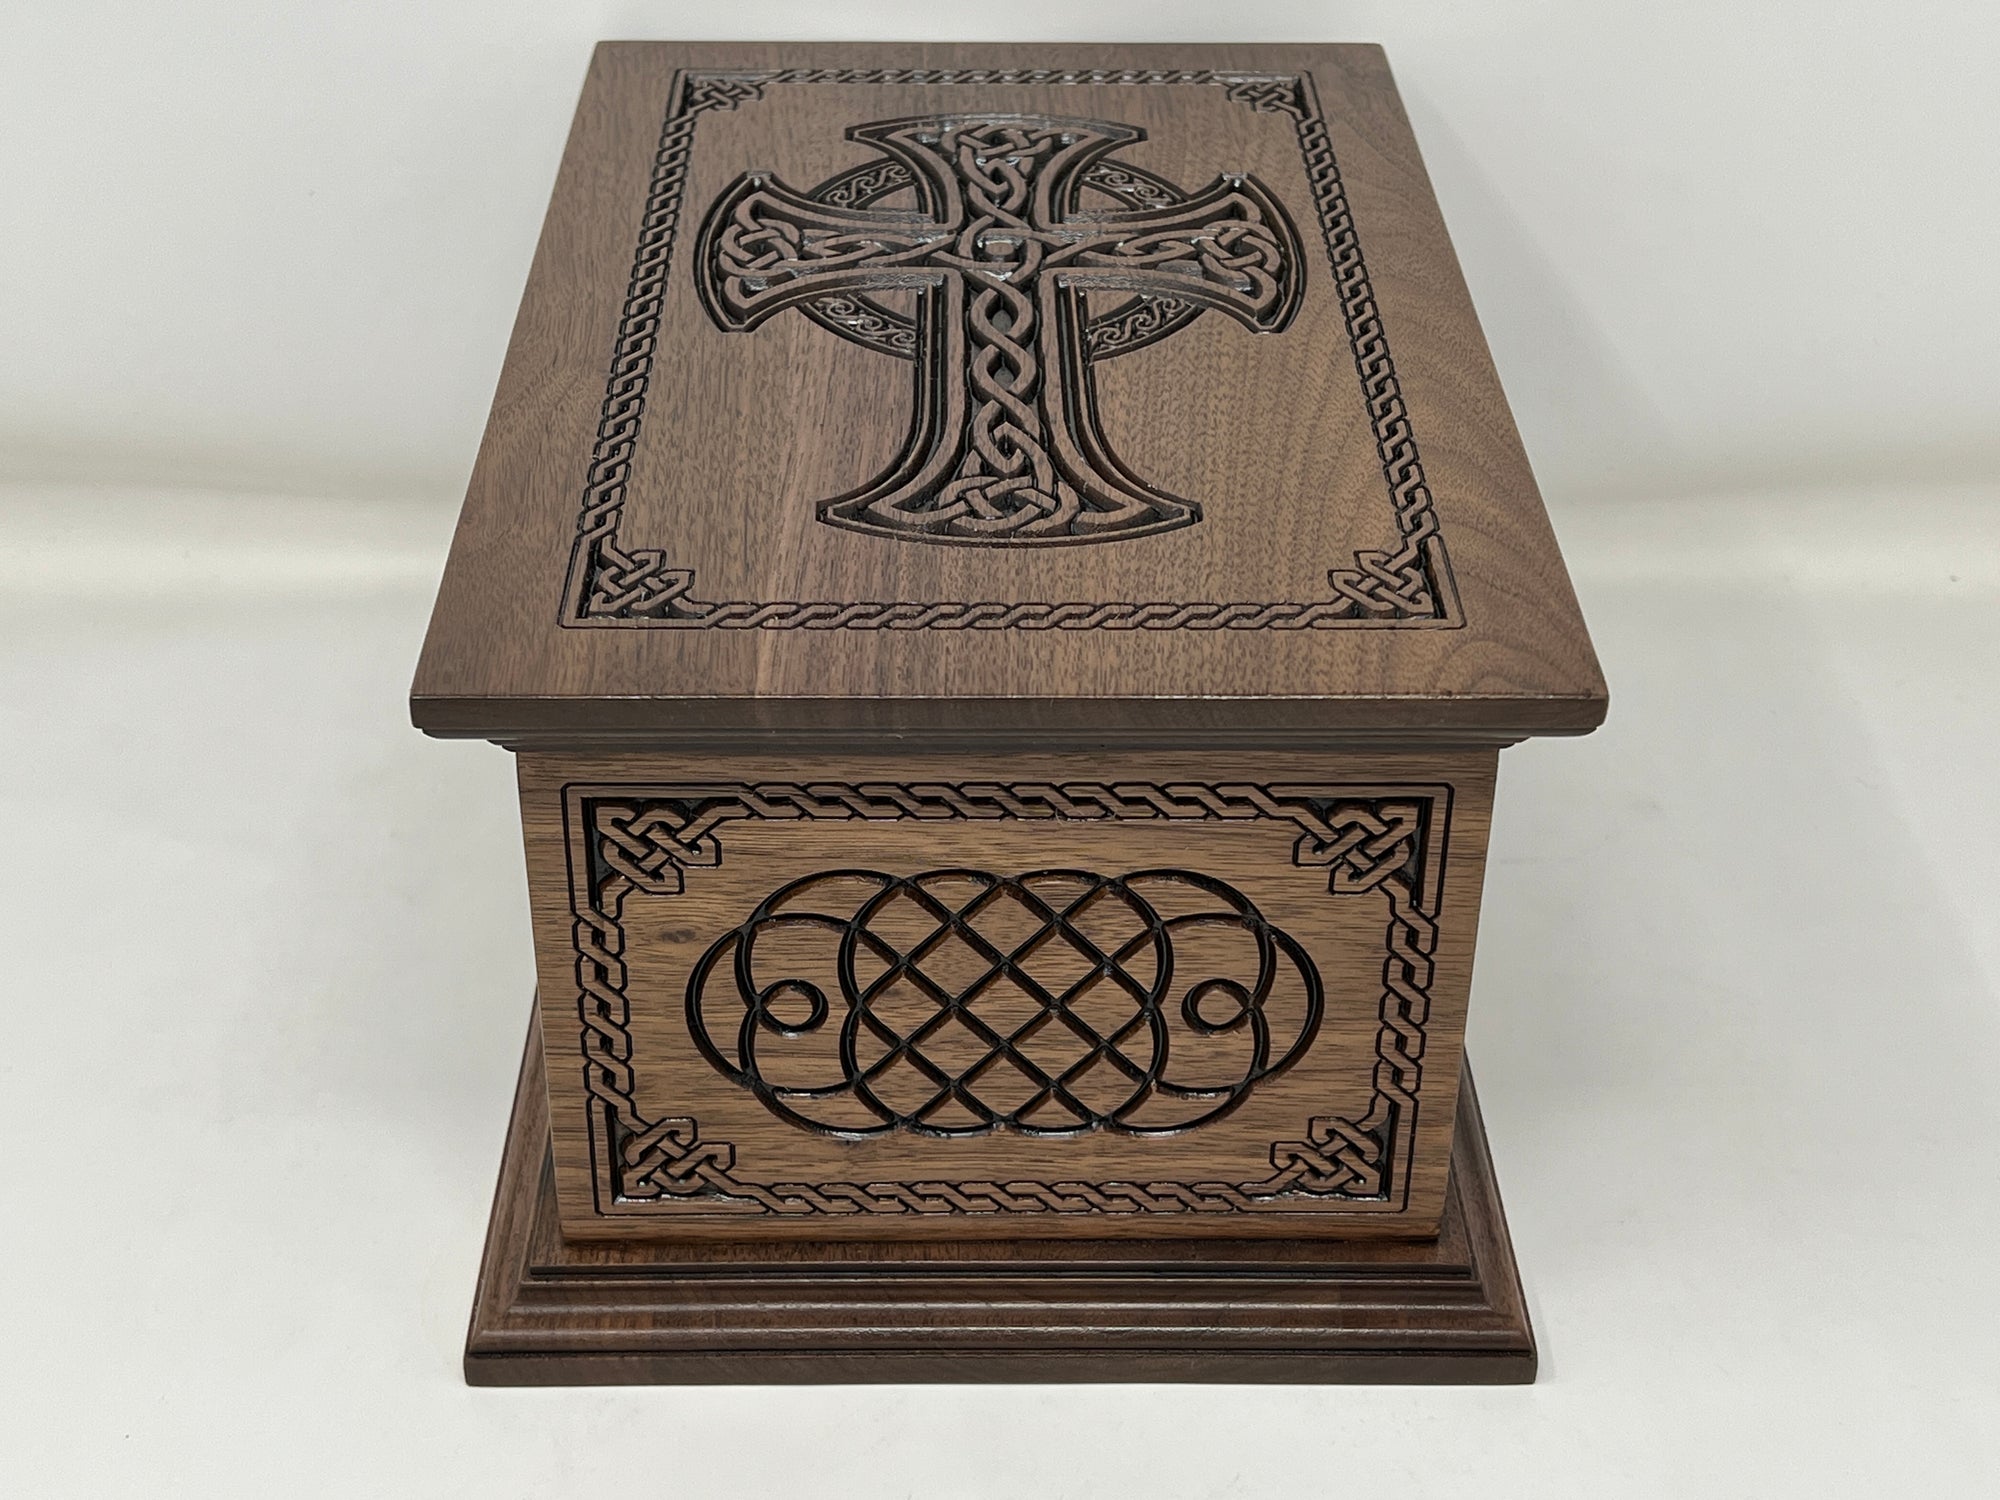 Celtic Cross and Weave Urn viewed from the short side with the top in view as well. The cross is seen on the top and the short side has the celtic weave carving, both surrounded by the celtic weave boarder.